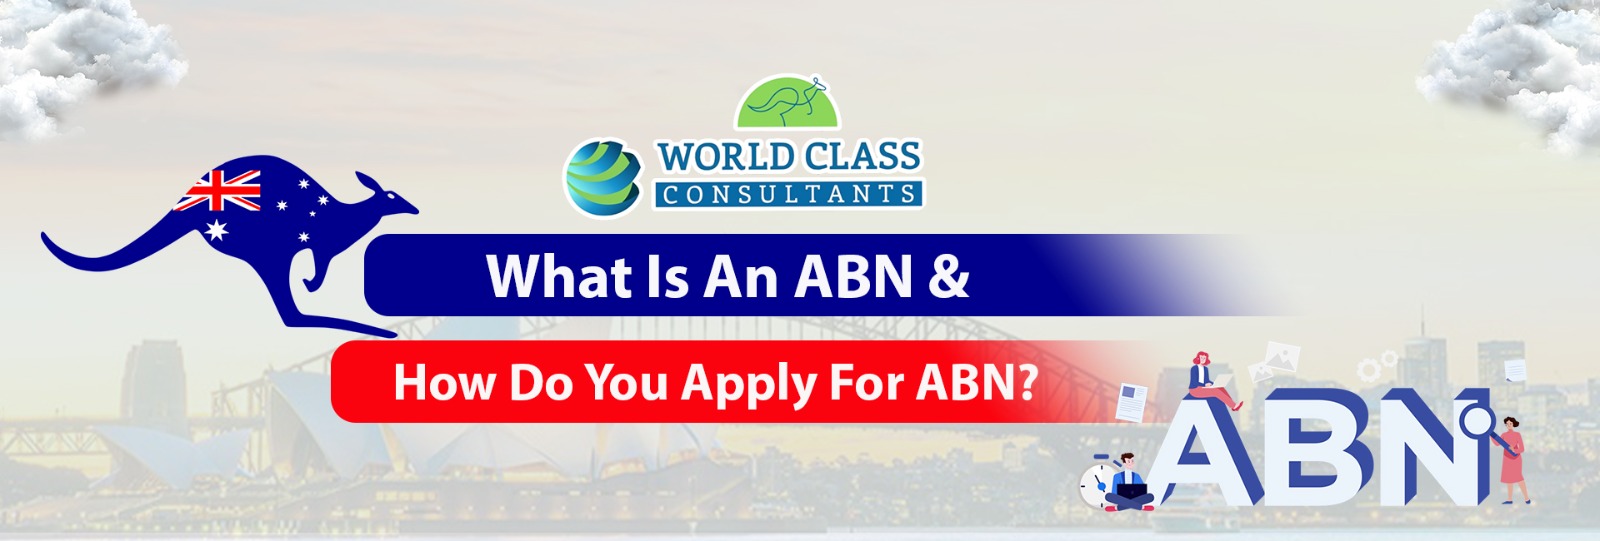 Step-by-step guide for obtaining an ABN in Australia